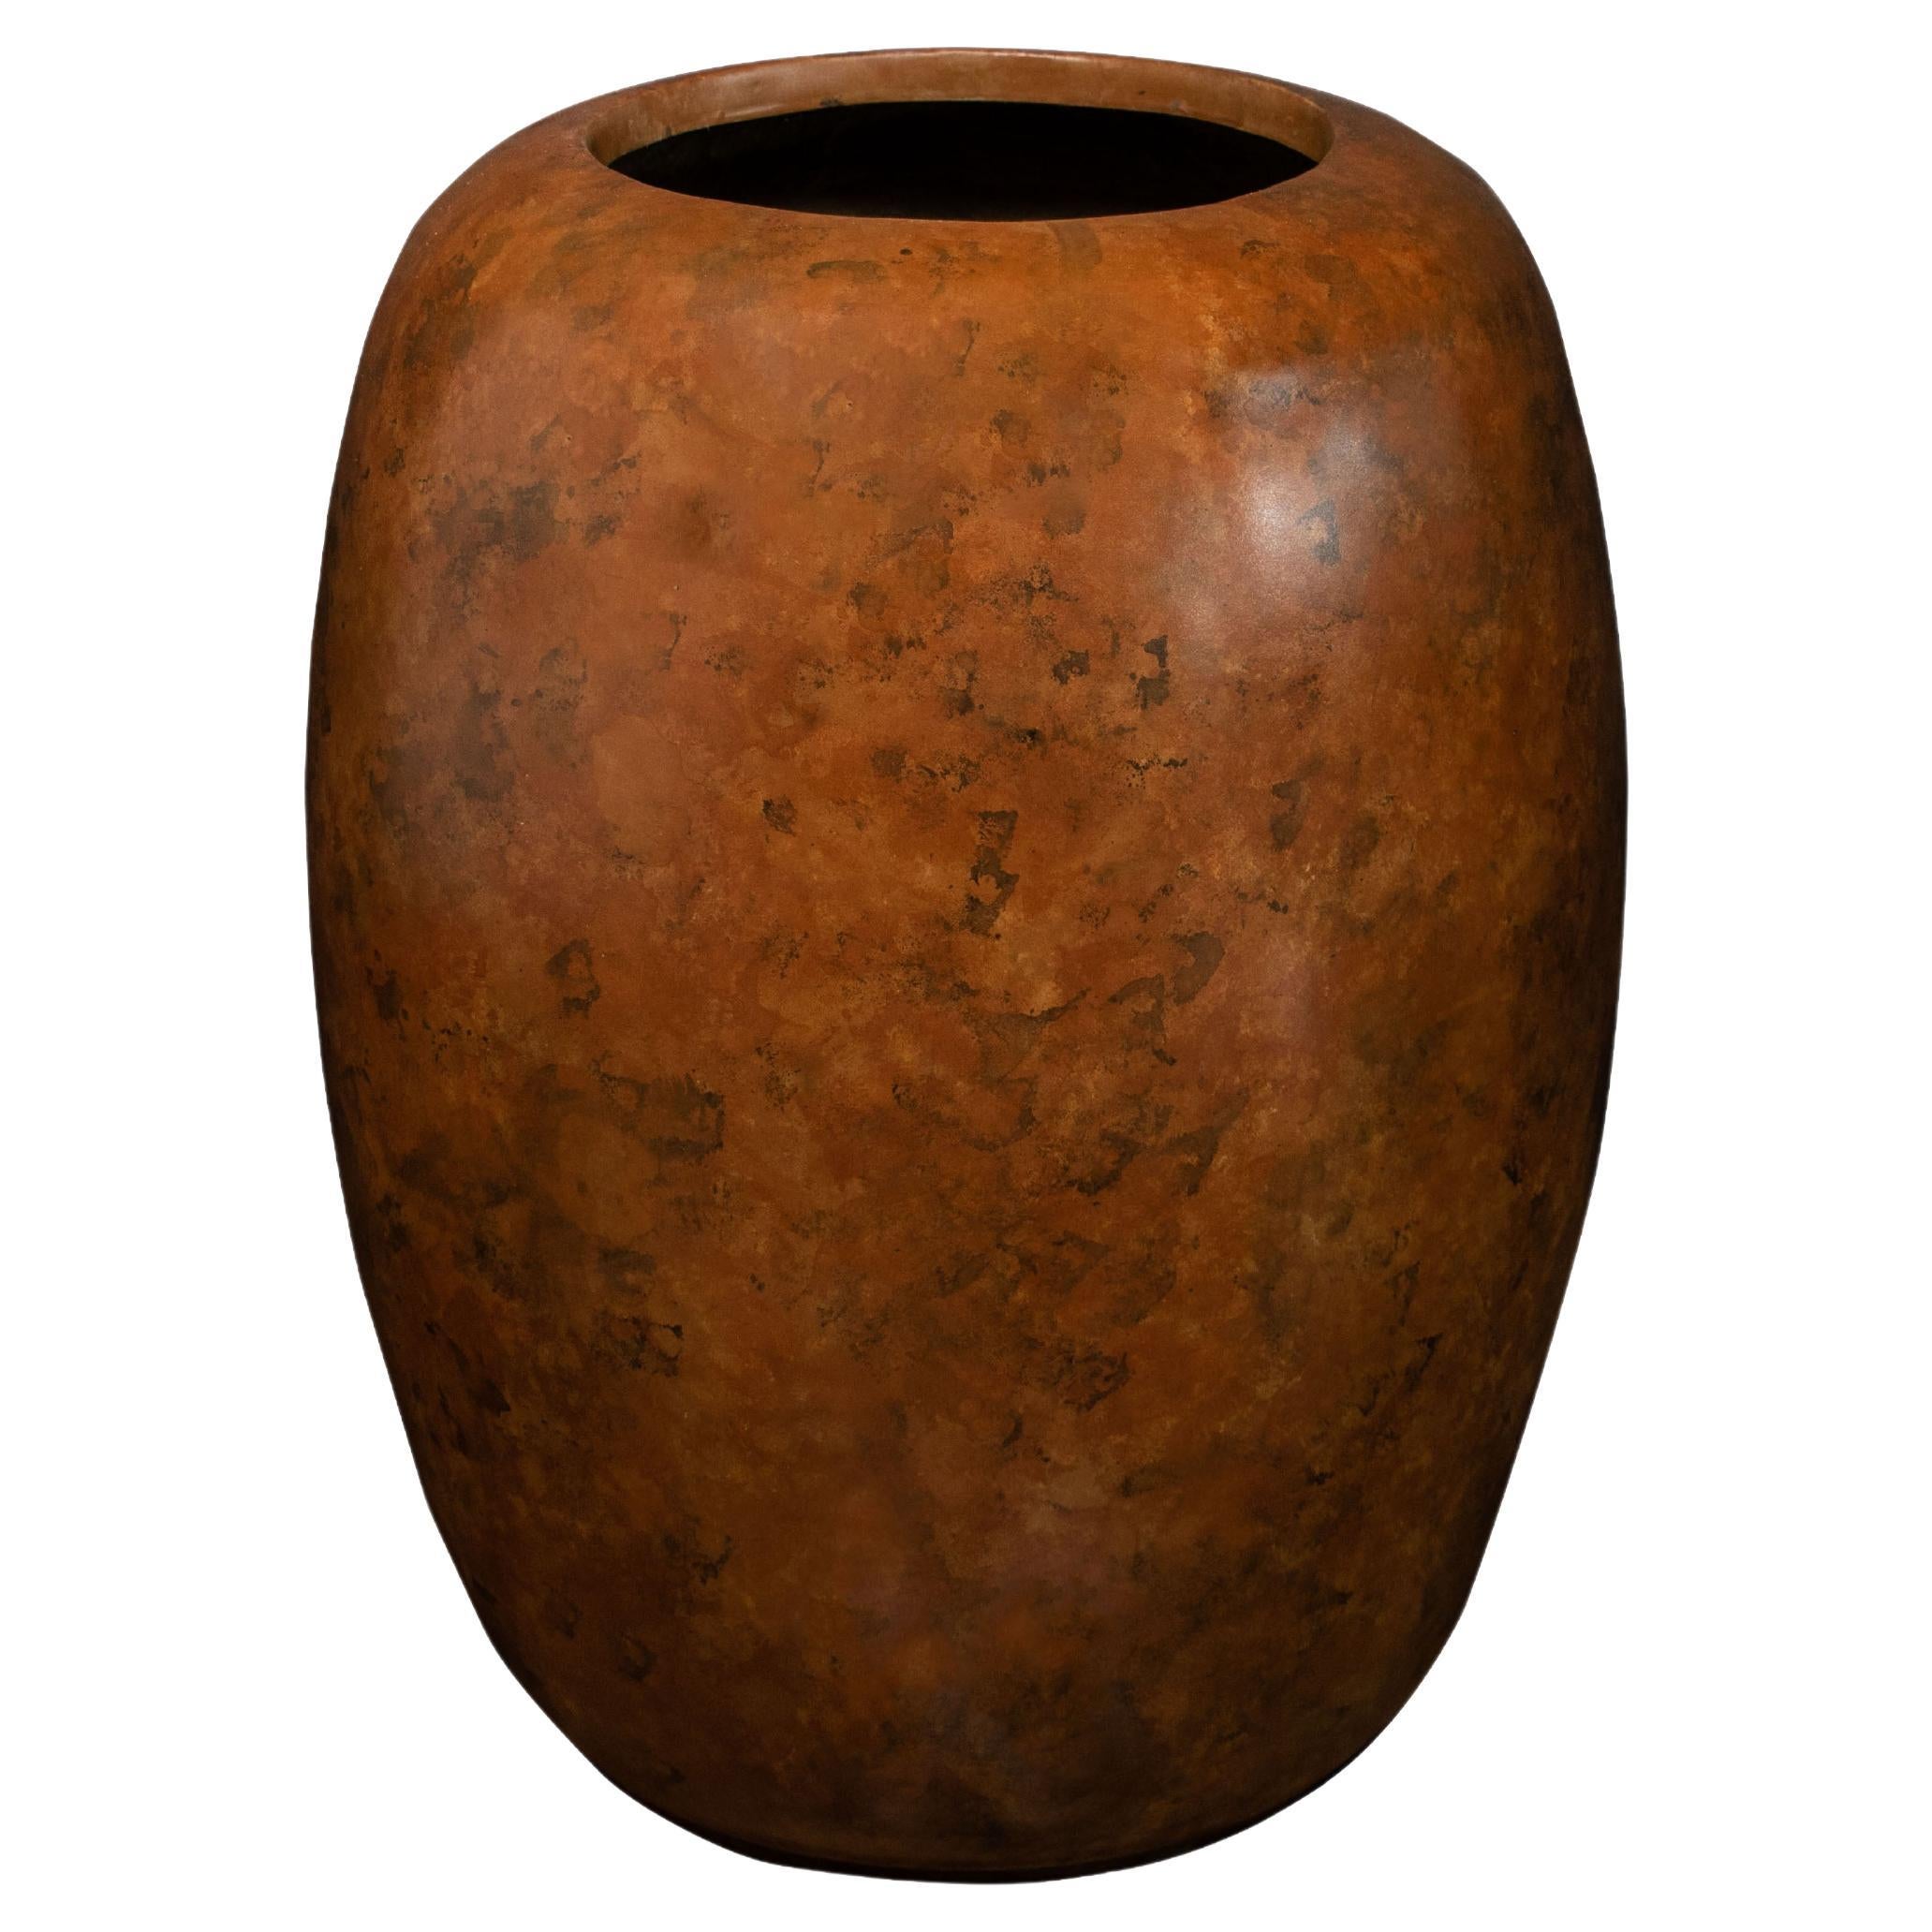 Modern Indoor/Outdoor Fiberglass Planter in Copper Finish by Costantini, Pamina  For Sale